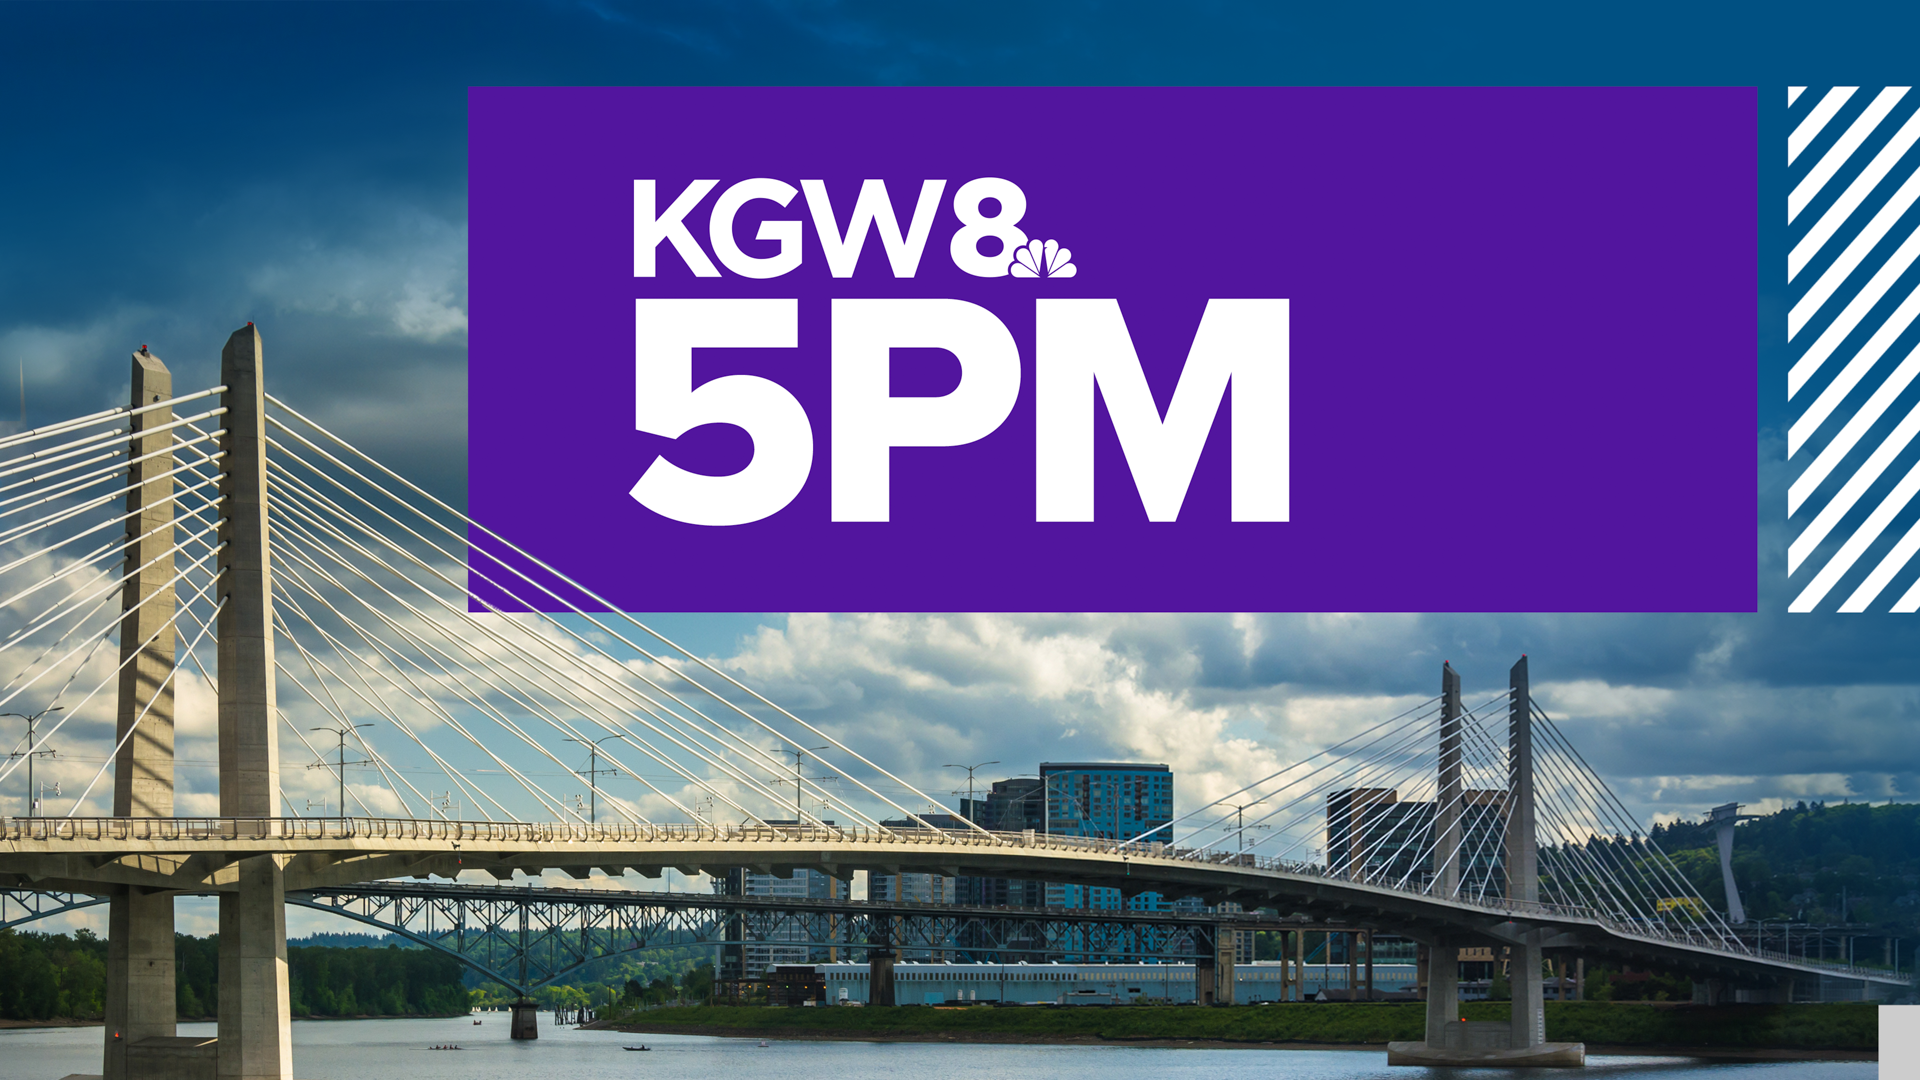 KGW Top Stories: 5 p.m., Tuesday, September 20, 2022